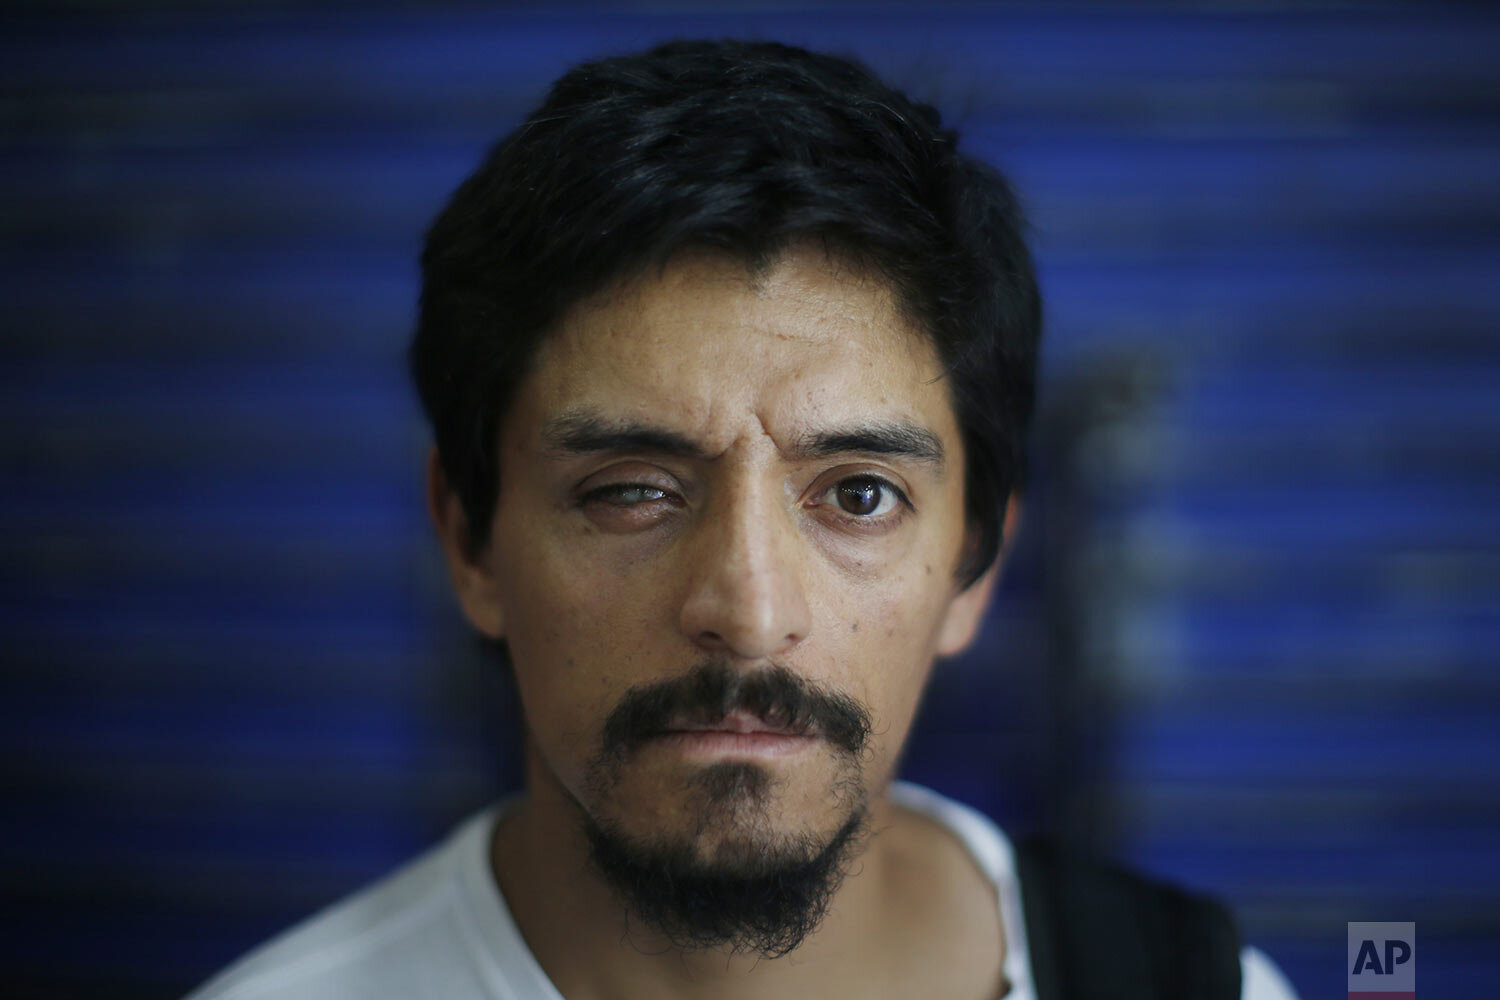  Eliacer Flores, who says his eye was injured when he was shot by police during an anti-government demonstration, poses for a portrait during a protest outside La Moneda presidential place in Santiago, Chile, Dec. 13, 2019. The U.N. released a report